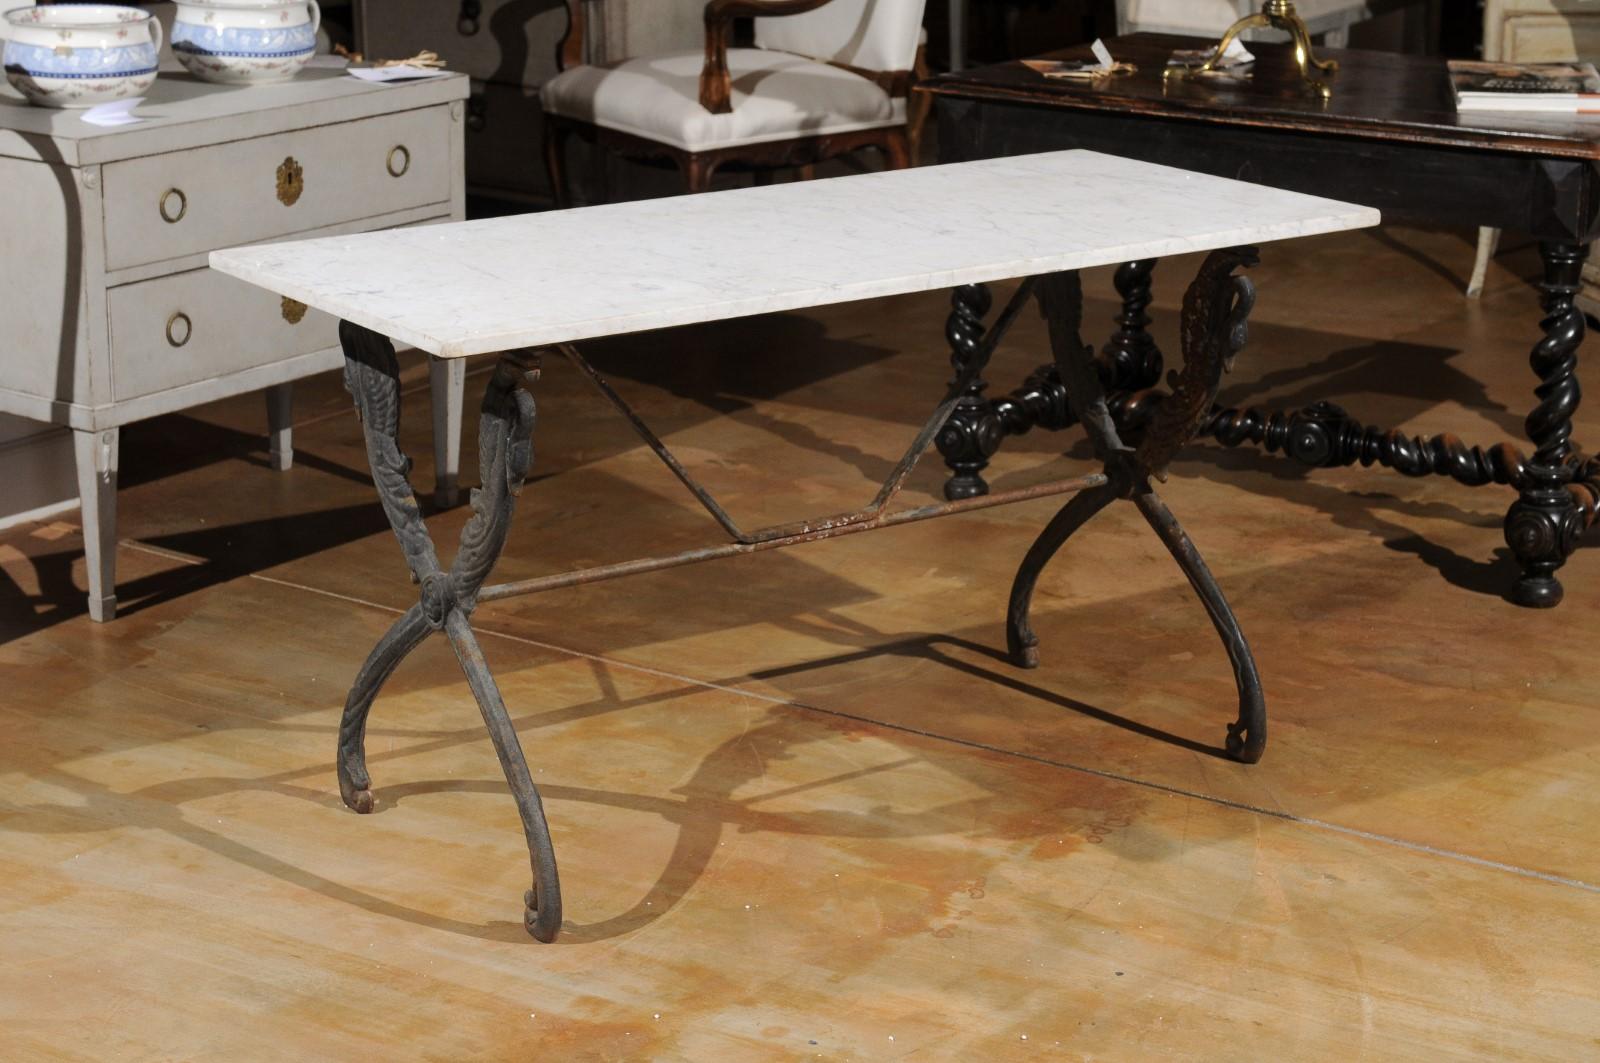 A French sofa table from the 20th century, with marble top and swan motifs. Created in France during the 20th century, this sofa table features a rectangular top sitting above an elegant iron base made of X-form legs topped with swans gracefully